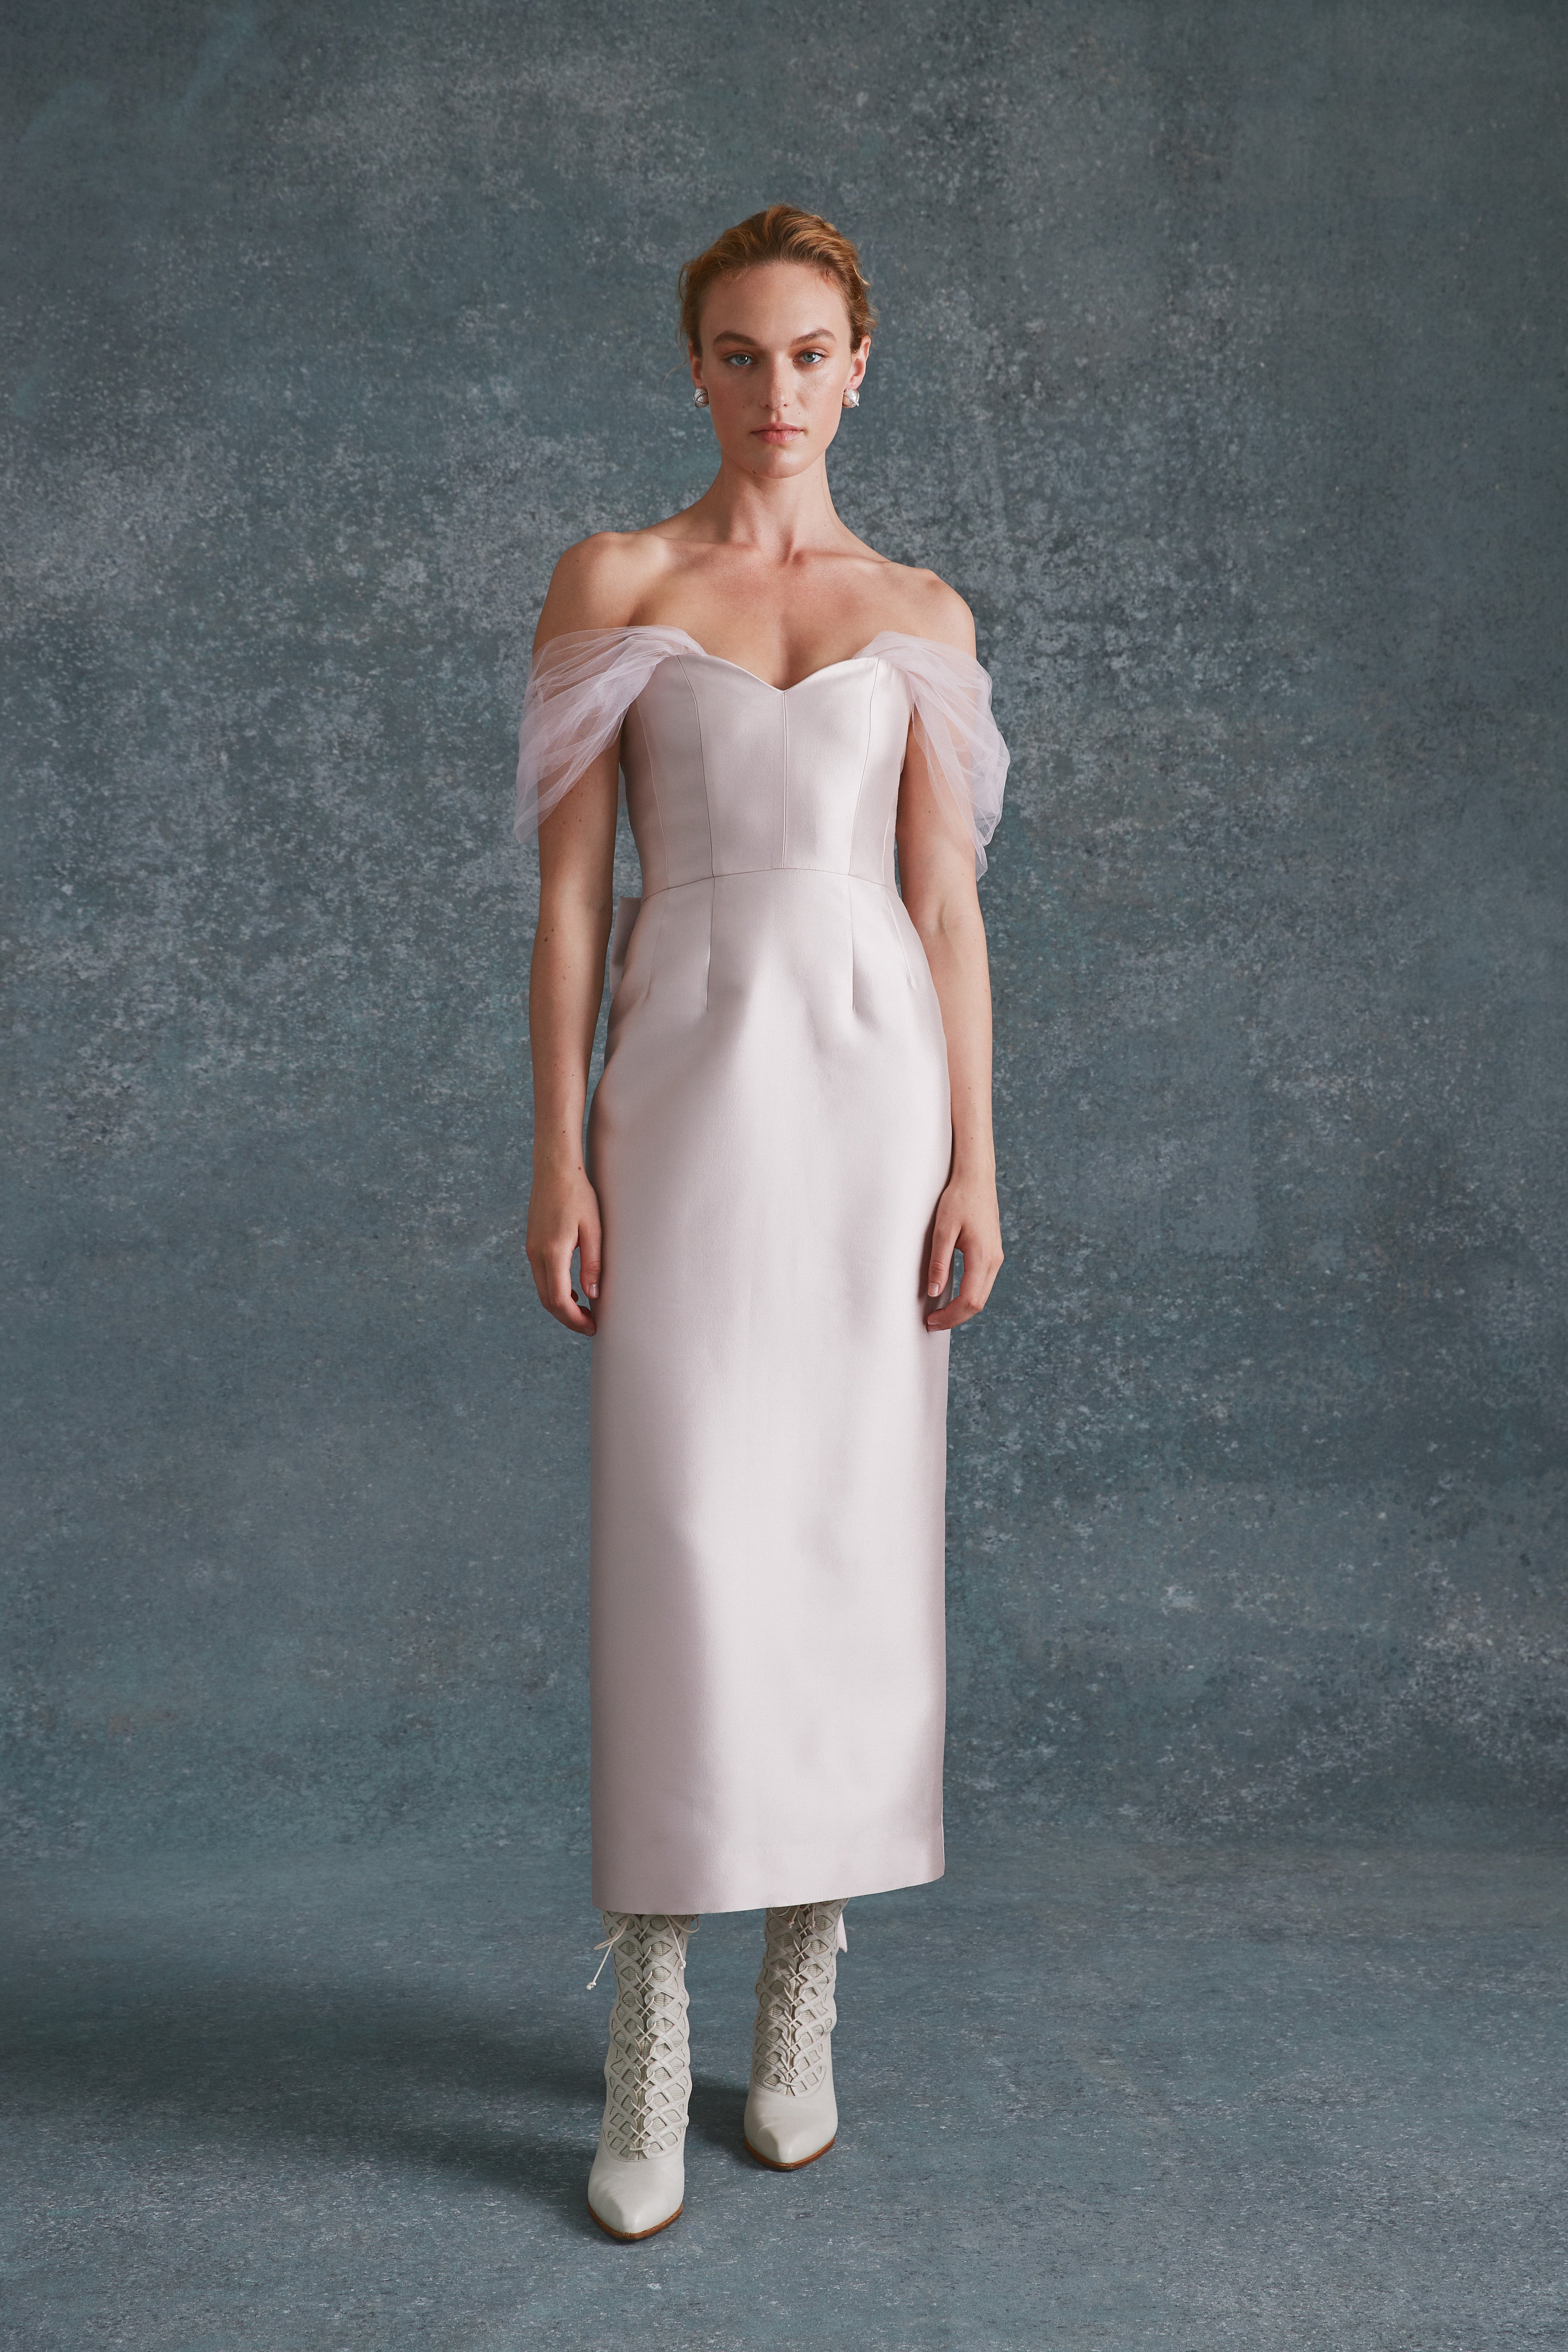 Alexandra Pijut Sylvie Dress in pink silk wool with tulle sleeves. Midi dress, wedding guest, black tie, bridal, outfit.  Mother of the bride, groom.